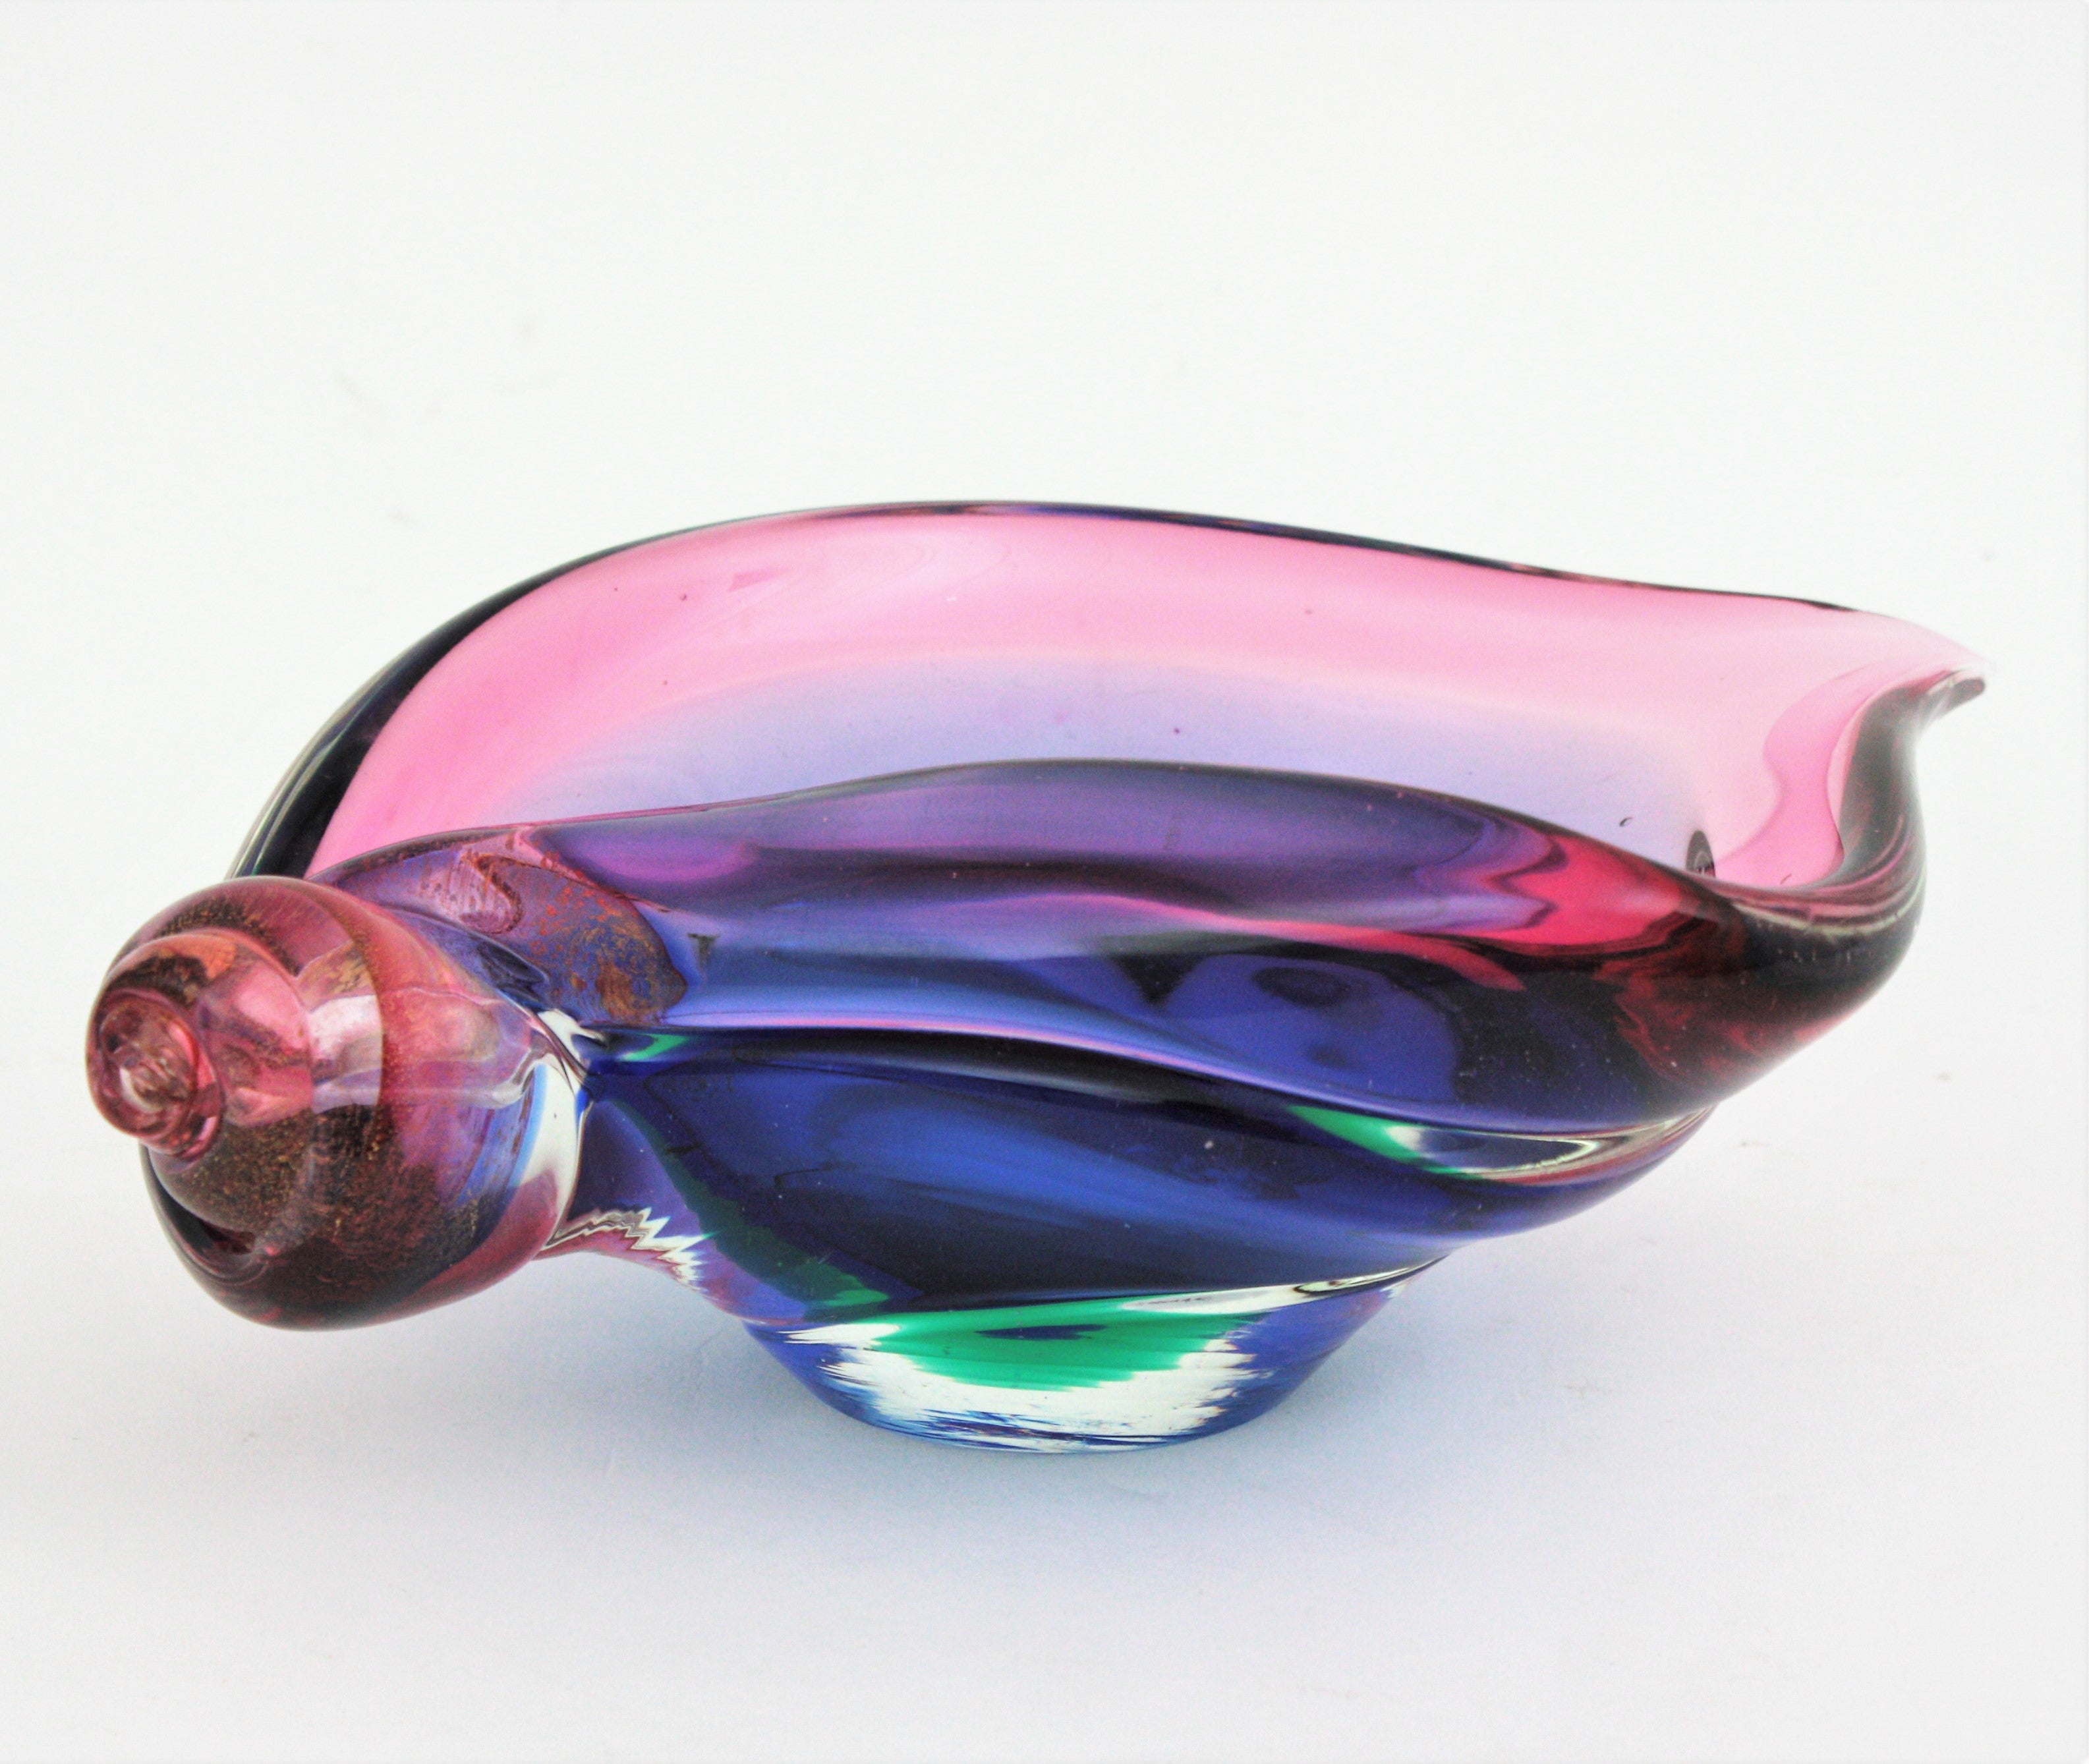 One of a kind hand blown Murano shell bowl centerpiece in shades from pink to blue. Attributed to Seguso, Italy, 1960s.
This beautiful shell bowl has pink, purple and blue glass cased into clear glass with Sommerso technique. It has an elegant and